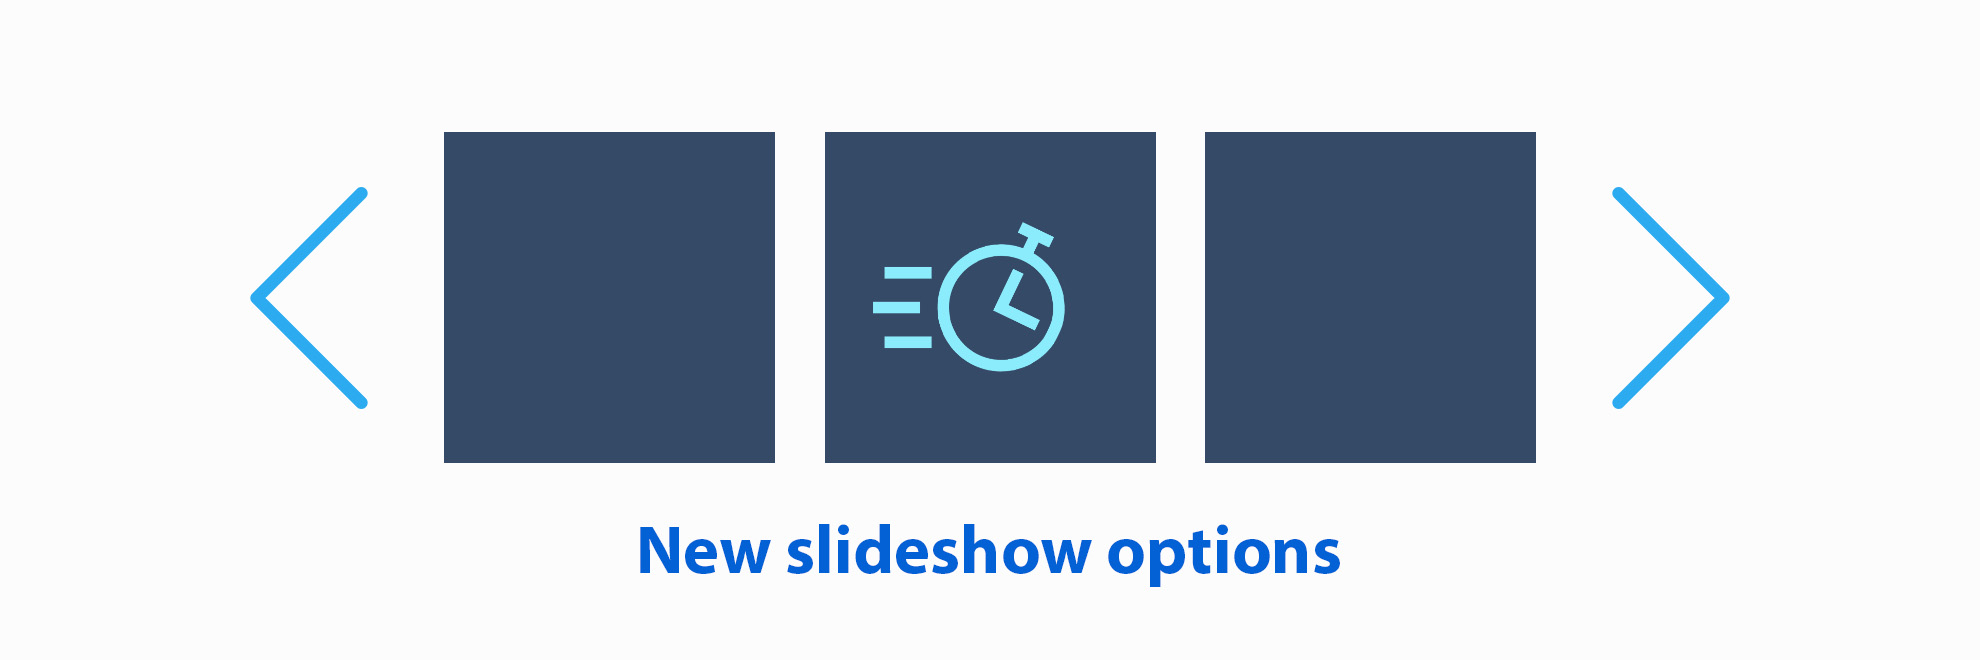 Illustration showing HTML slideshow with navigation, clock icon on the middle slide and the new slideshow options caption.